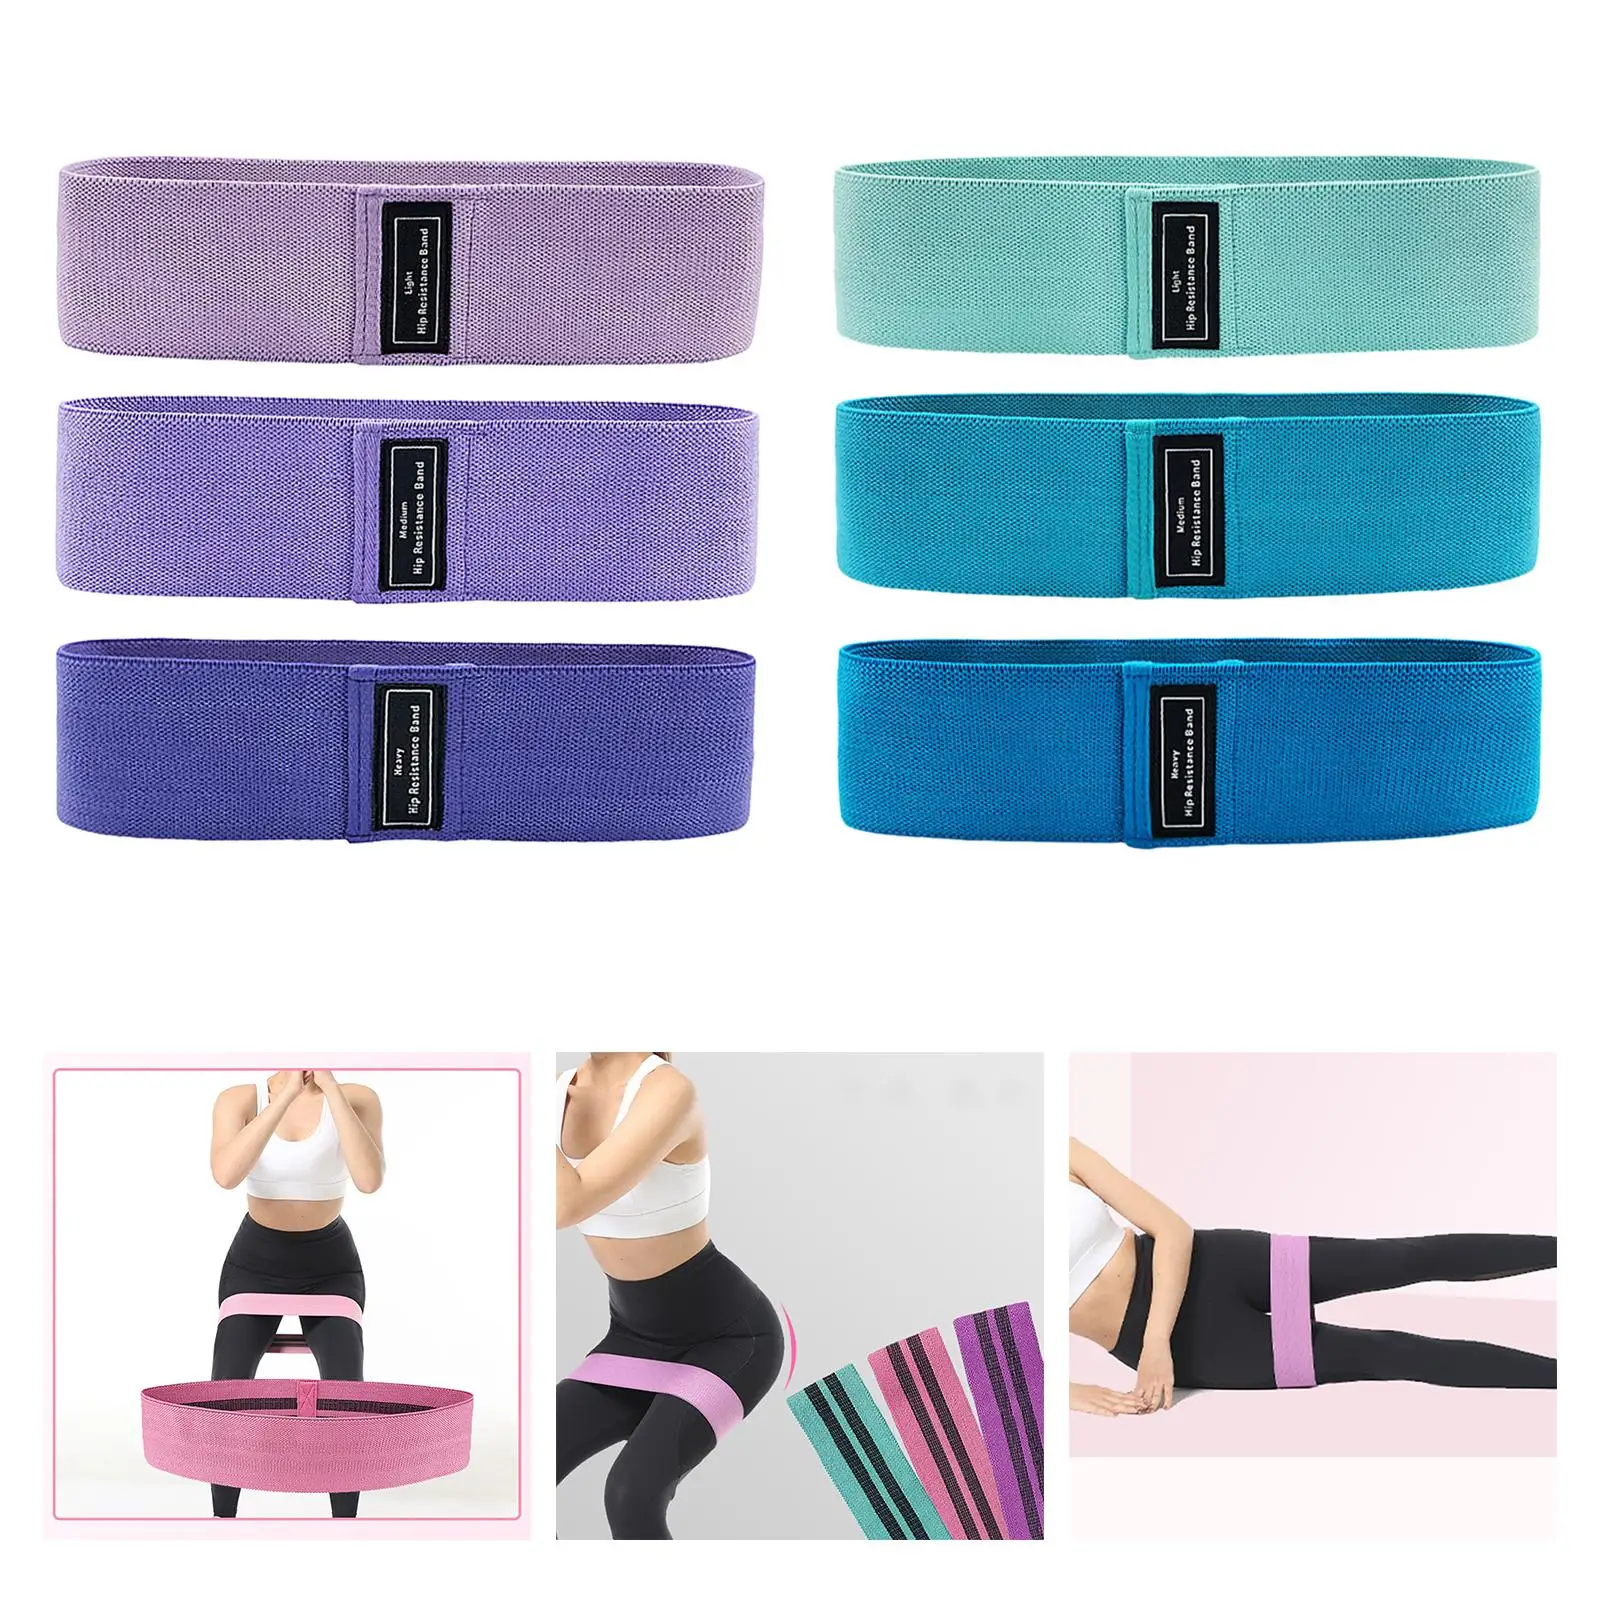 3x Resistance Bands 3 Different Resistance Levels Workout Elastic Belt Bands for Women Men Thigh Fitness Strength Training